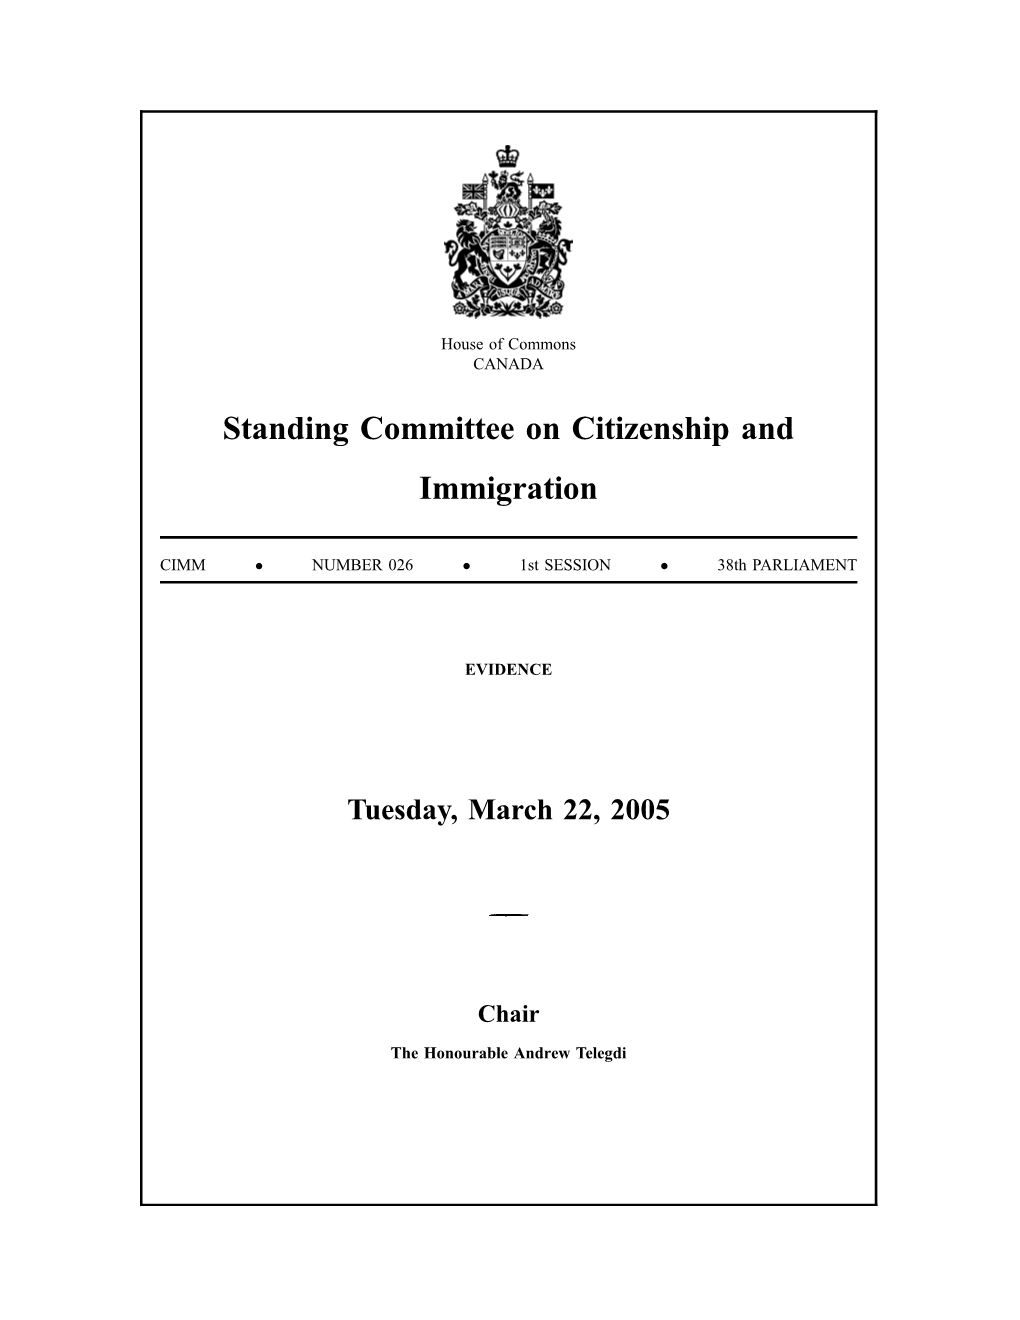 Standing Committee on Citizenship and Immigration